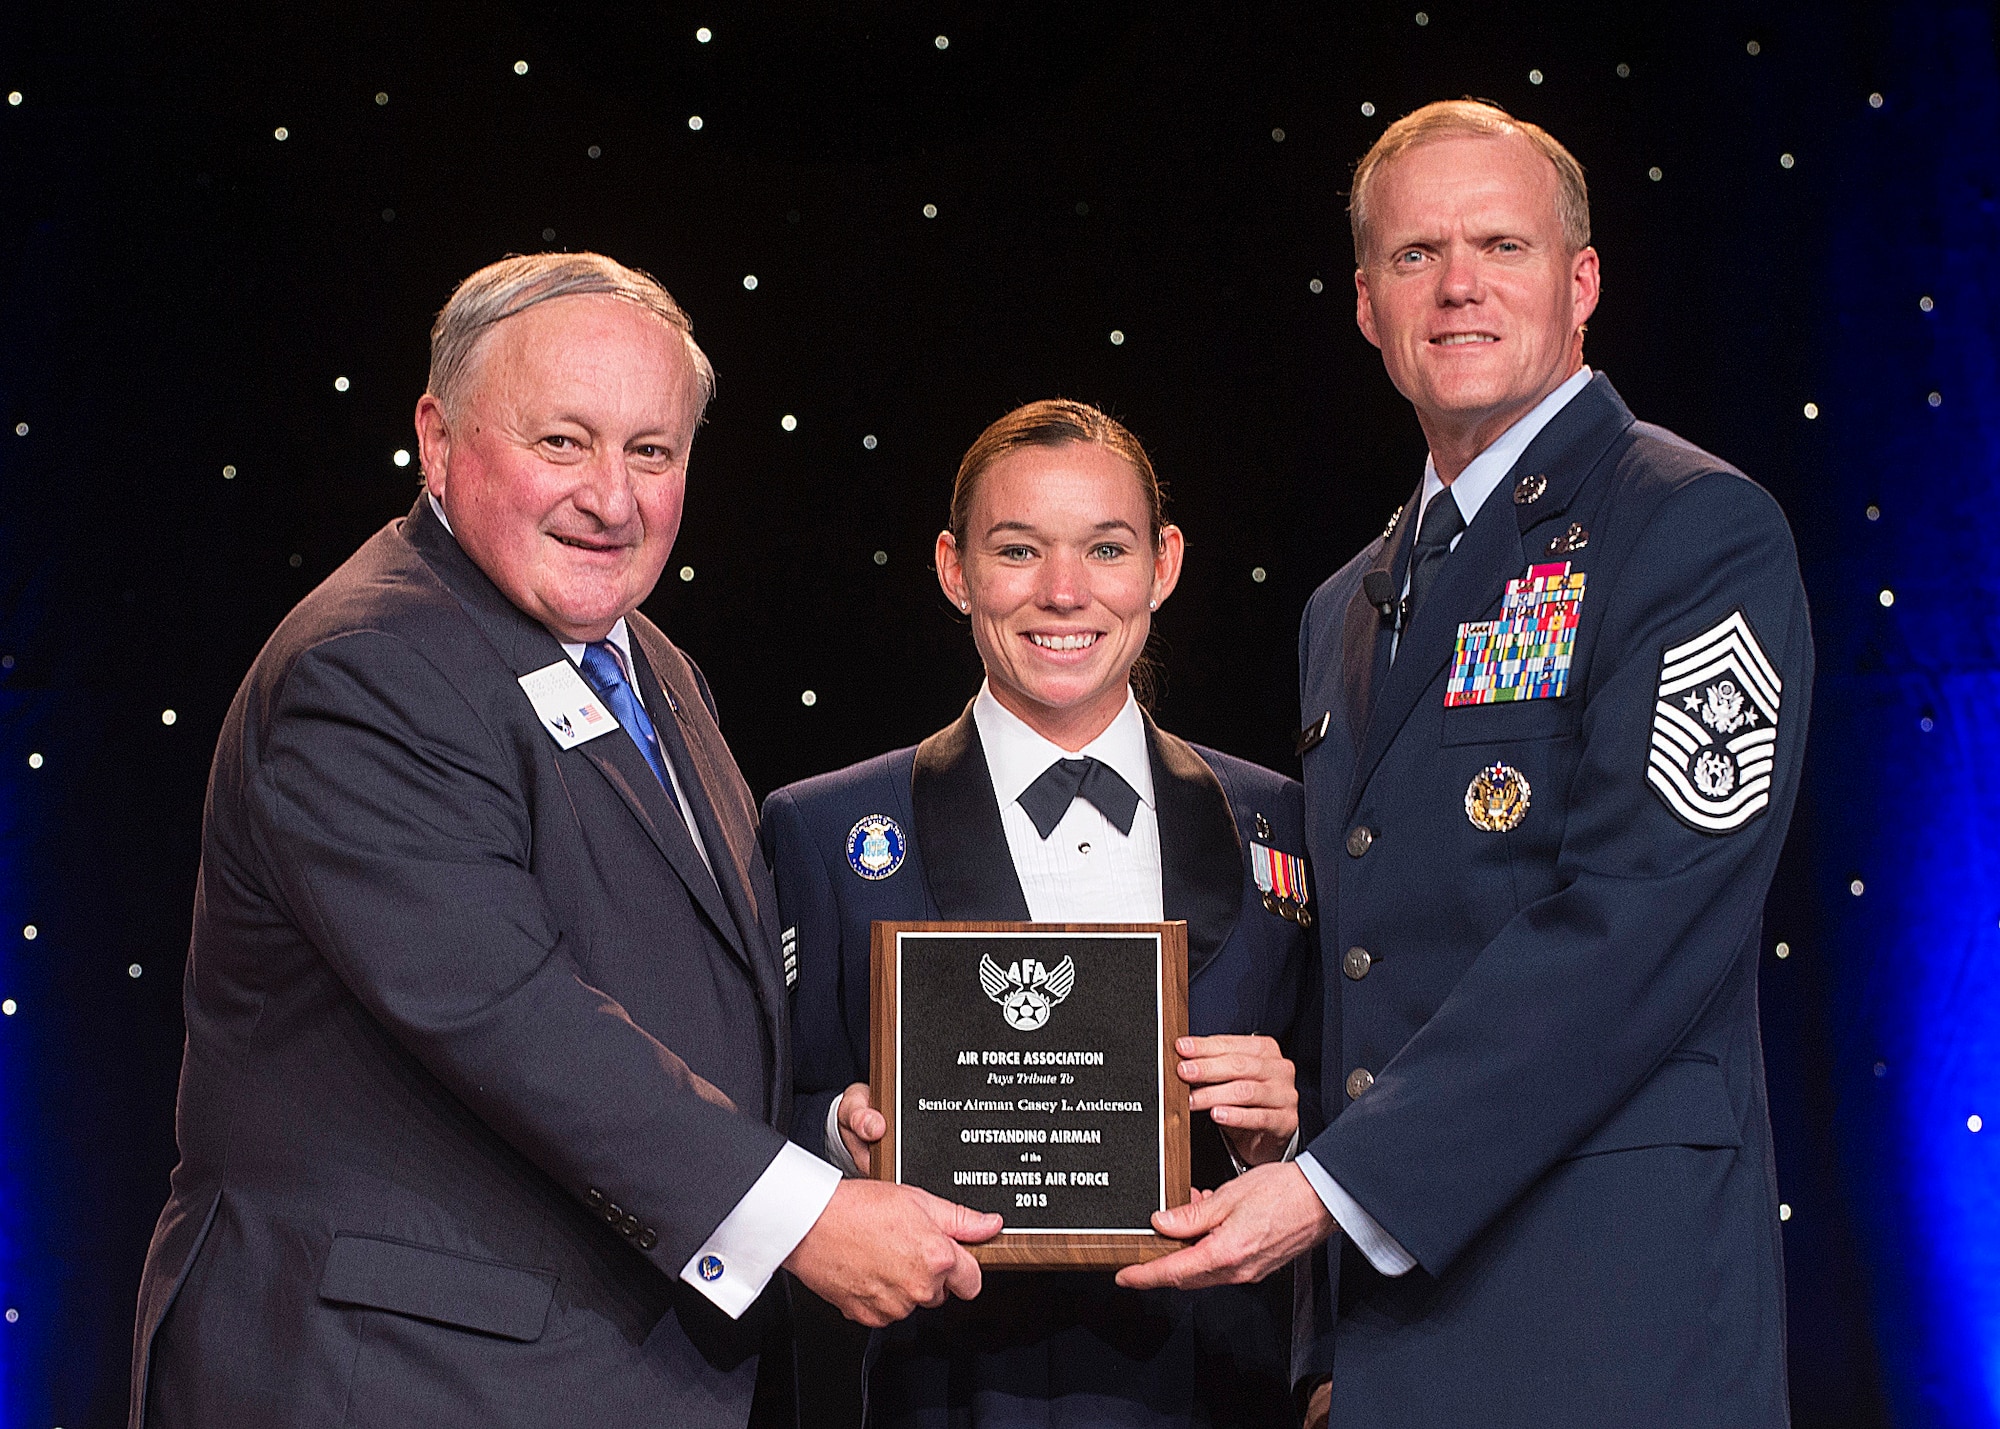 Staff Sgt. Casey Anderson was recognized as one of the 12 Outstanding Airmen of the Year at a reception and awards dinner hosted by the Air Force Association during the AFA's annual Air & Space Conference and Technology Exposition Sept. 16, 2013, in Washington, D.C.  The OAY award recognizes the top 12 outstanding enlisted Airmen for superior leadership, job performance, community involvement and personal achievements. Anderson is a mental health technician with the 59th Mental Health Squadron at Joint Base San Antonio-Lackland, Texas. (U.S. Air Force photo/Jim Varhegyi)